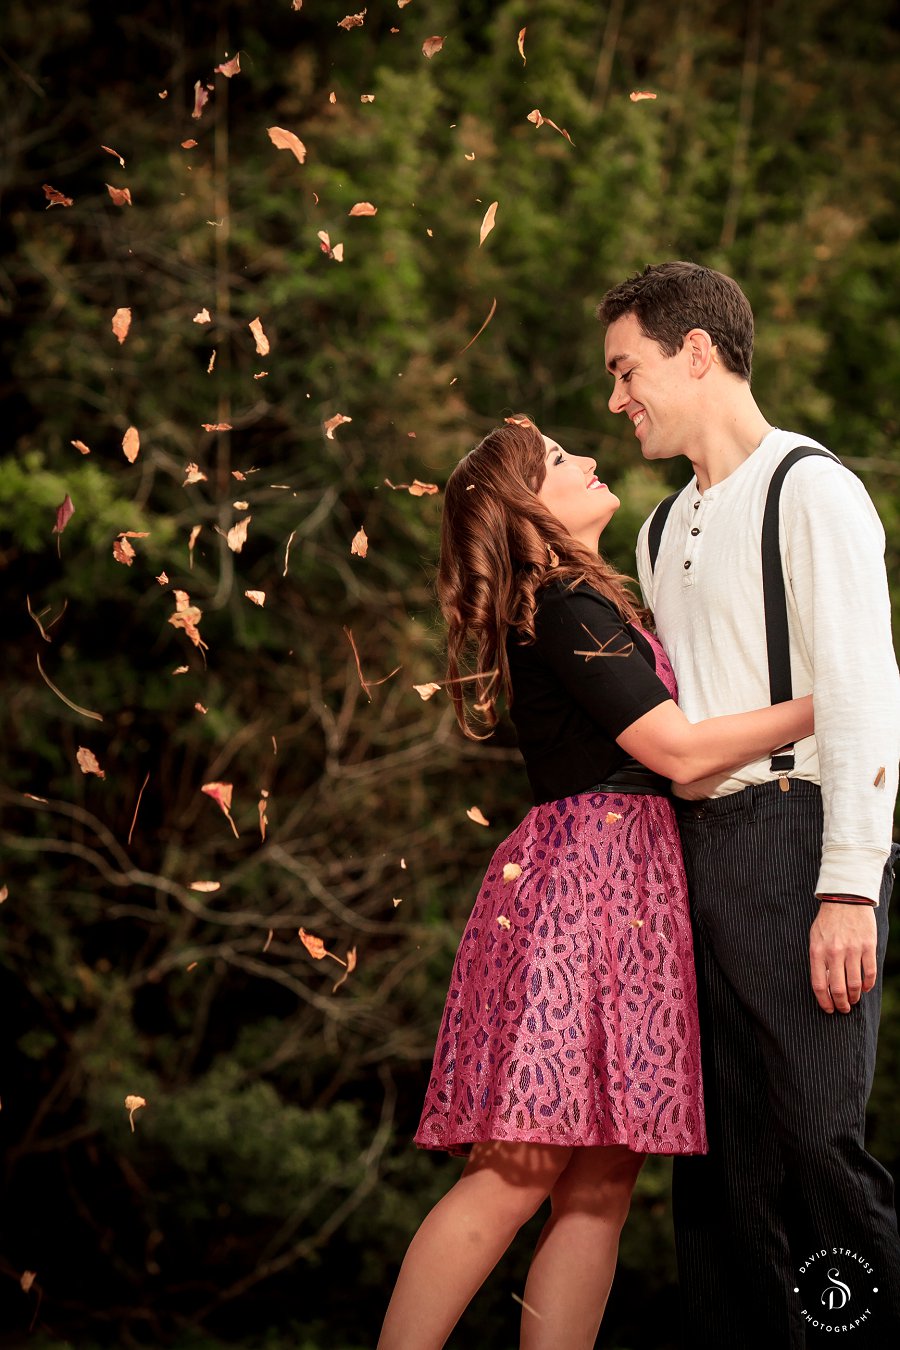 Boone Hall Engagement Pictures - Charleston Wedding Photographer David Strauss - Morgan and Andrew - 7